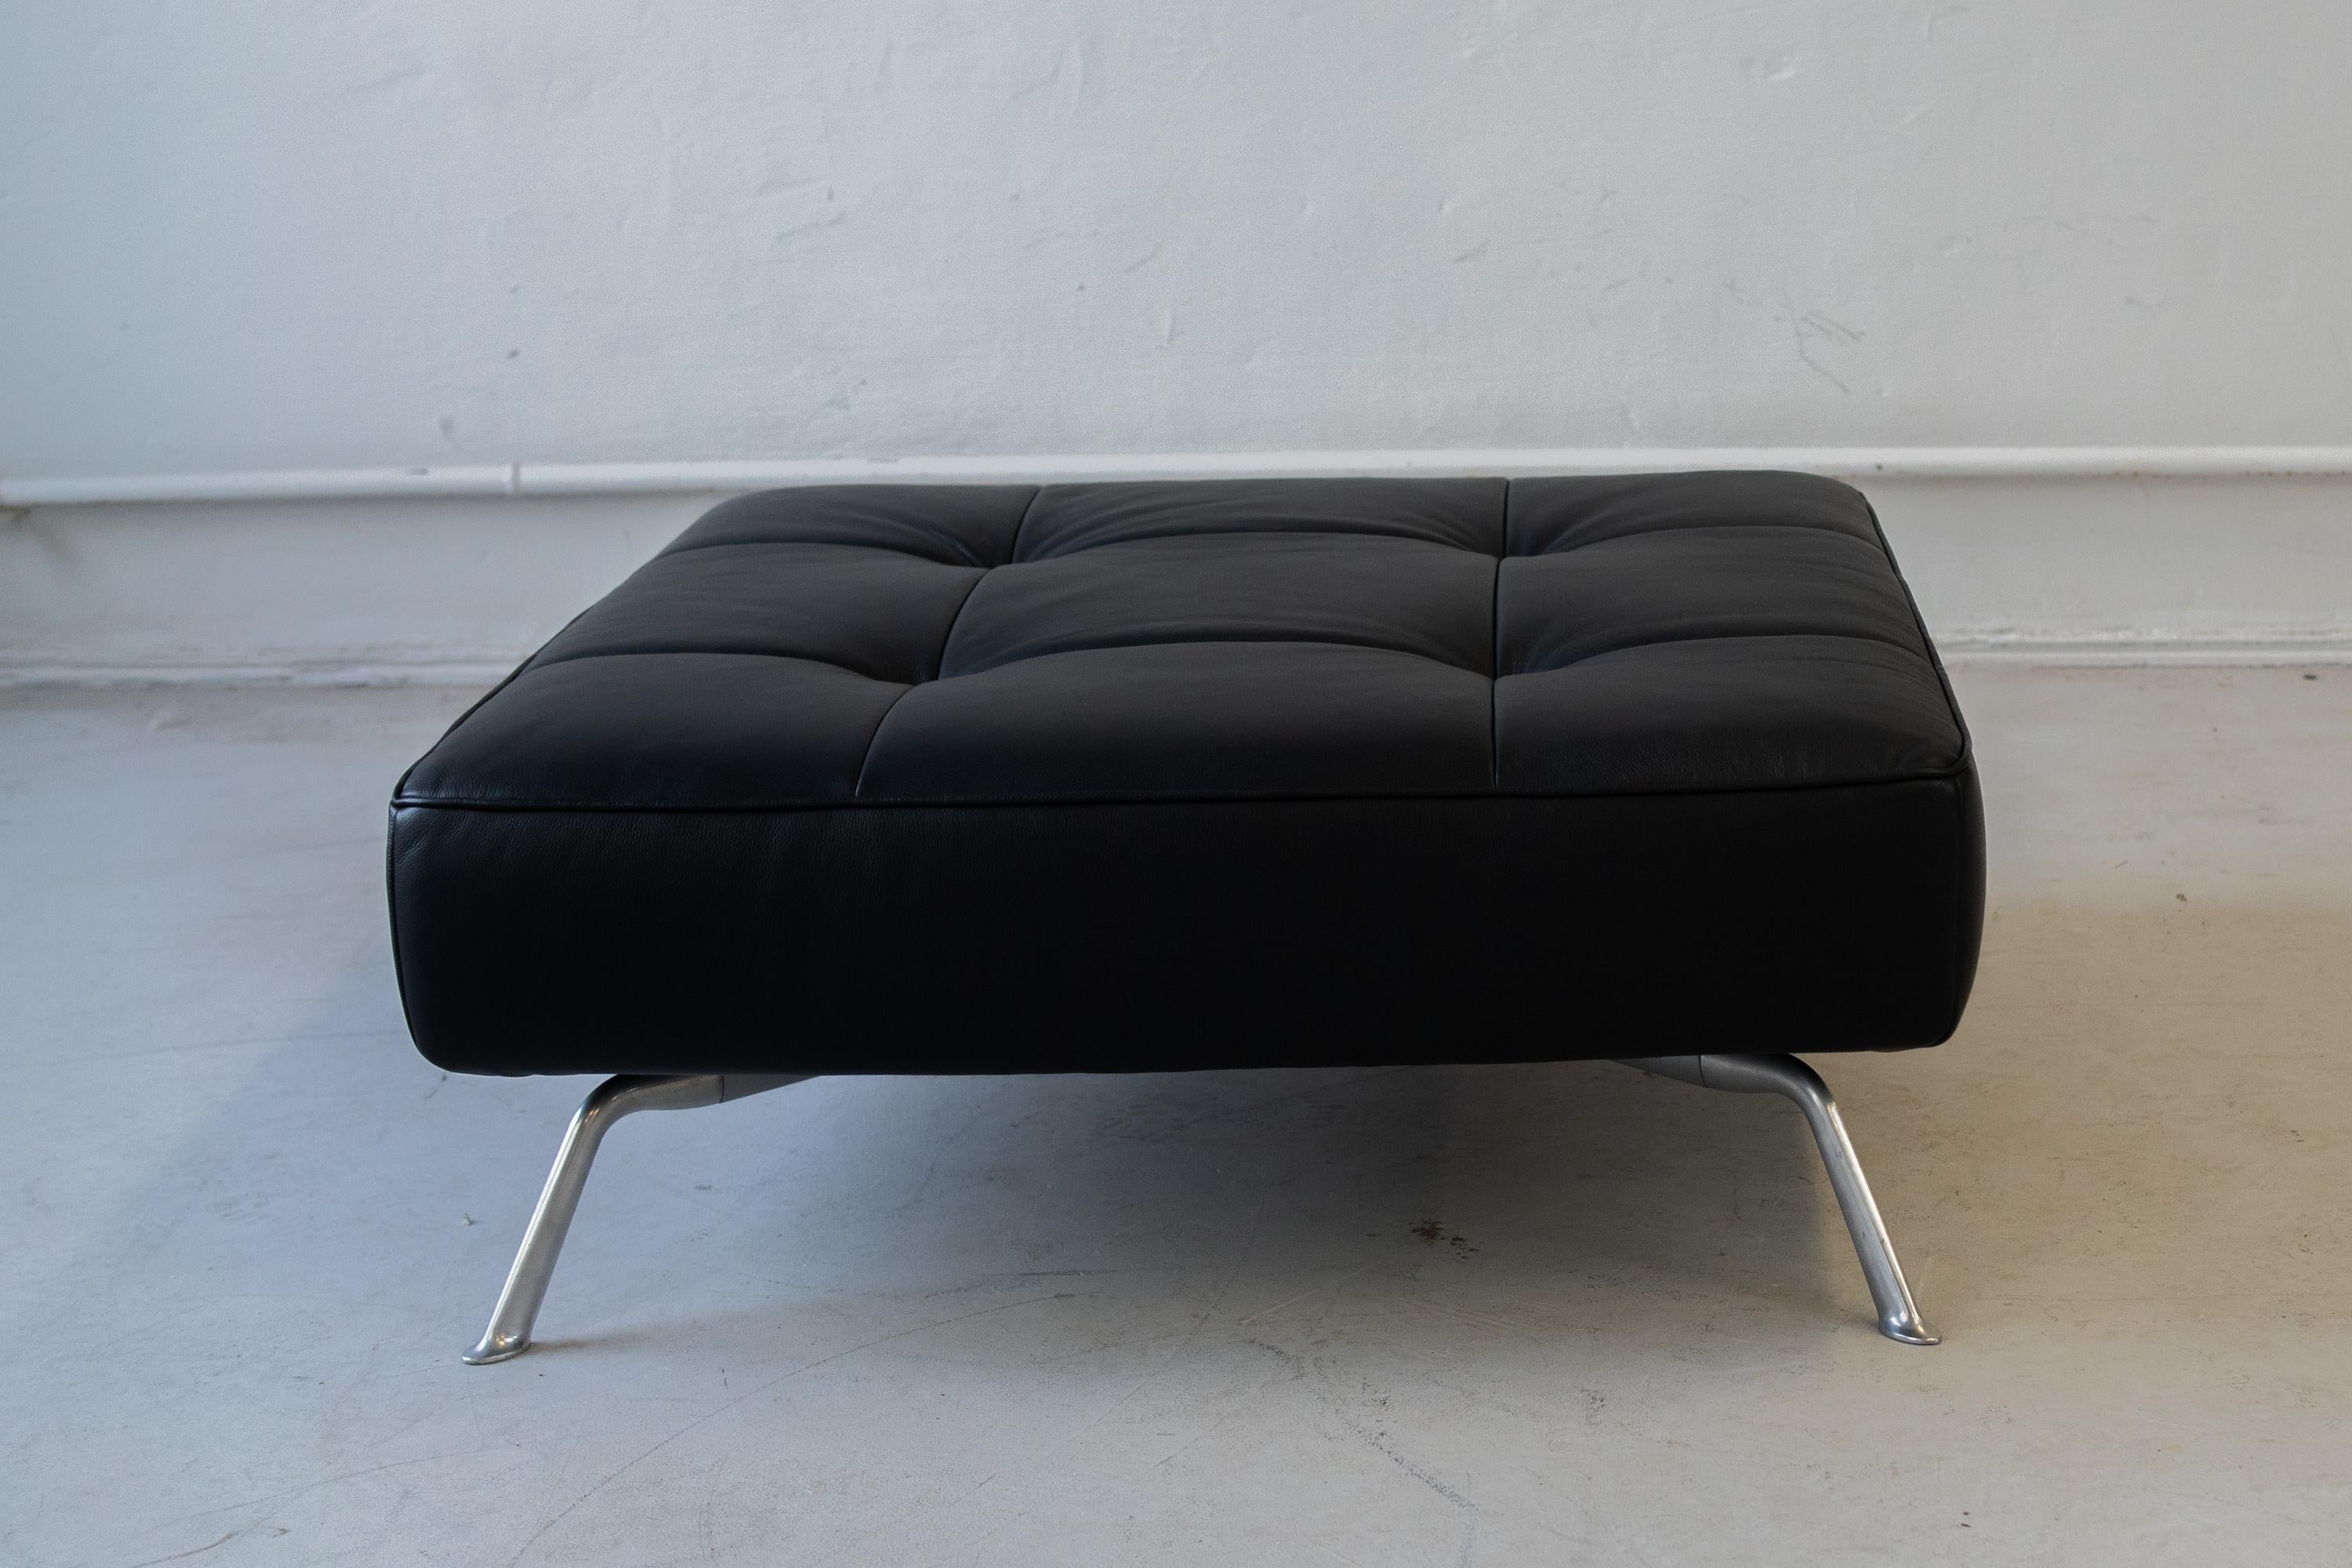 The Smala sofa with pouf by Pascal Mourgue for Ligne Roset, 90s.
It is convertible, allows the user to addapt and modify it, 
I addition , there is a big and squery pouf, 
The pieces are upholsterd with a black leather. 
the dimensions of the